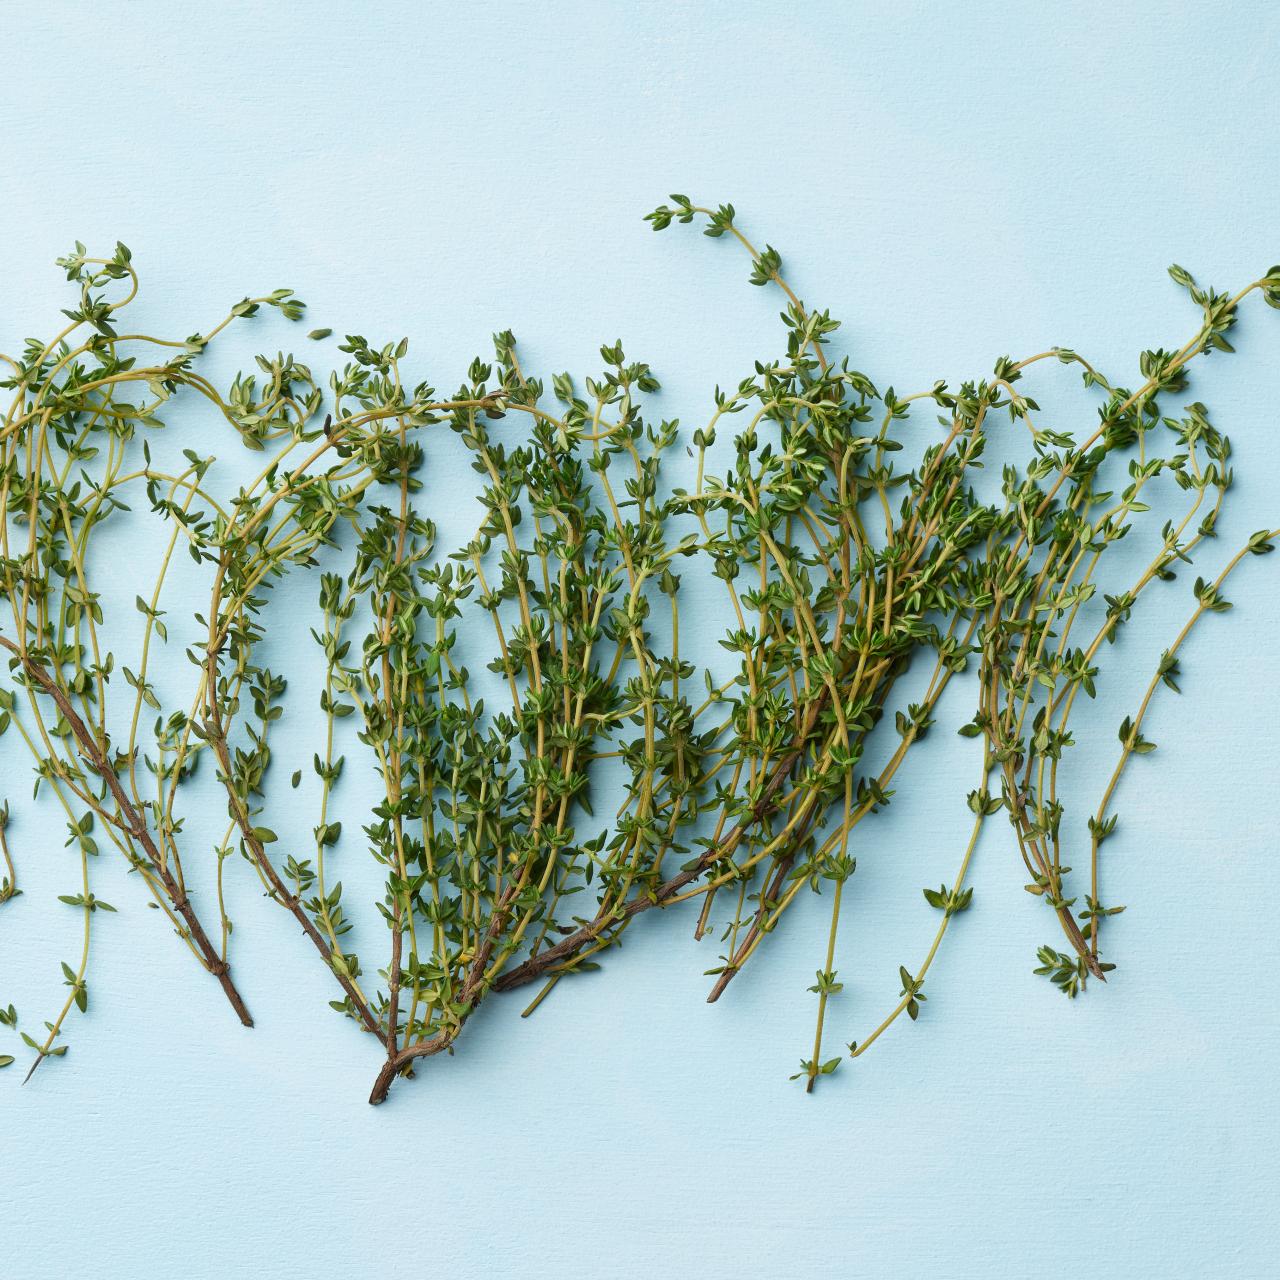 How Many Teaspoons Are In A Sprig Of Thyme